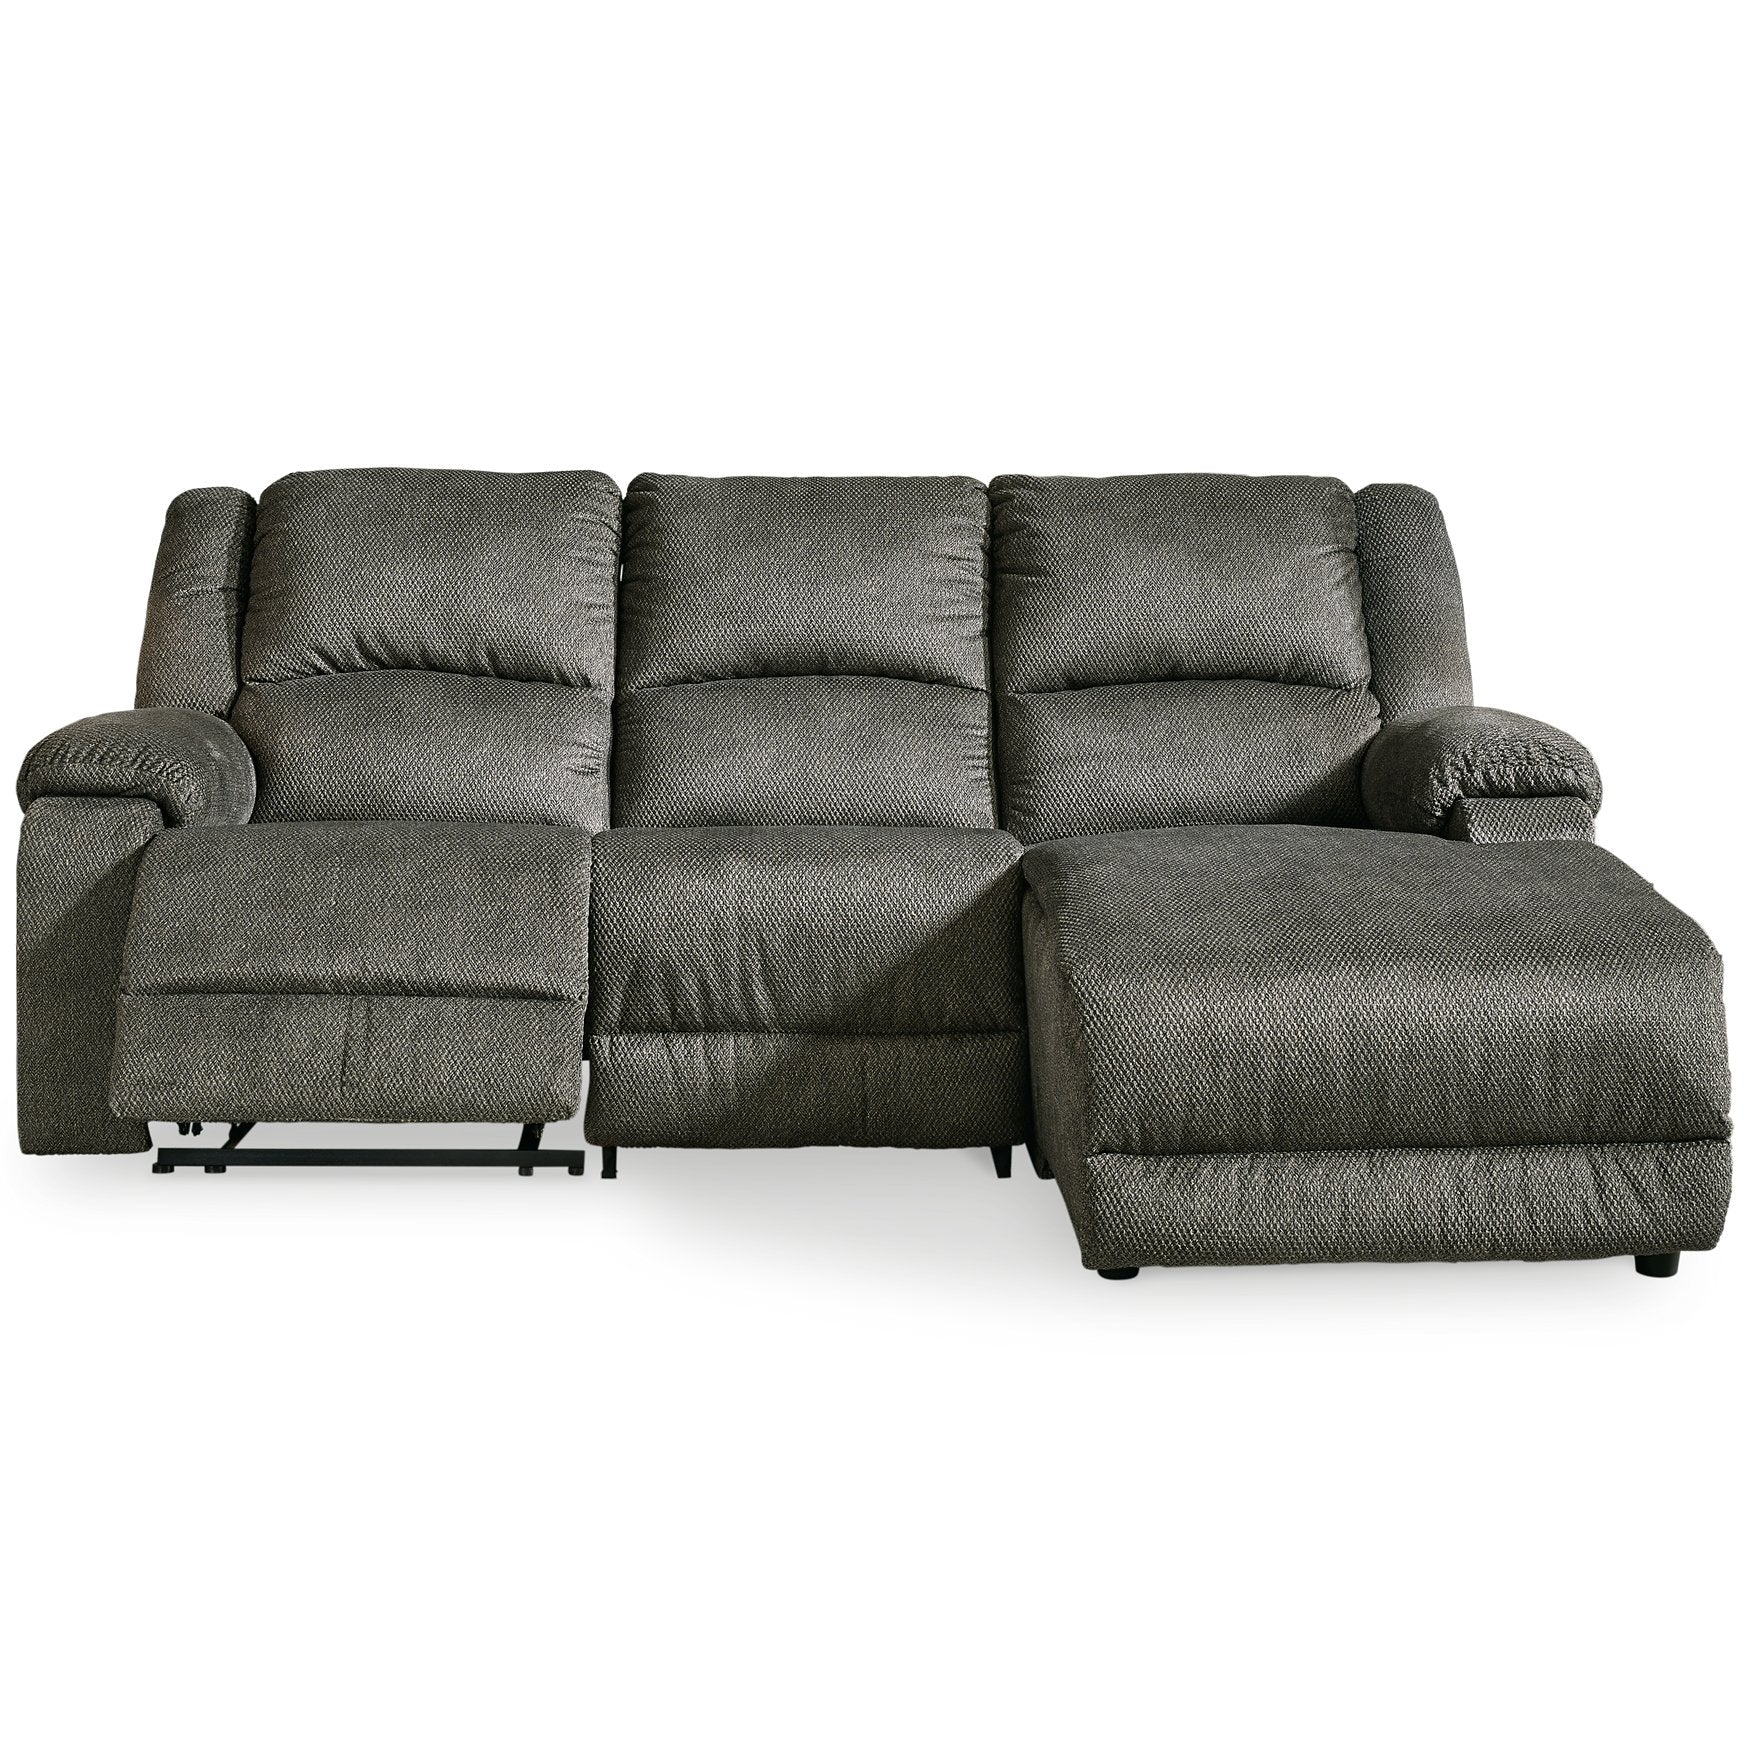 Benlocke Reclining Sectional with Chaise - Half Price Furniture